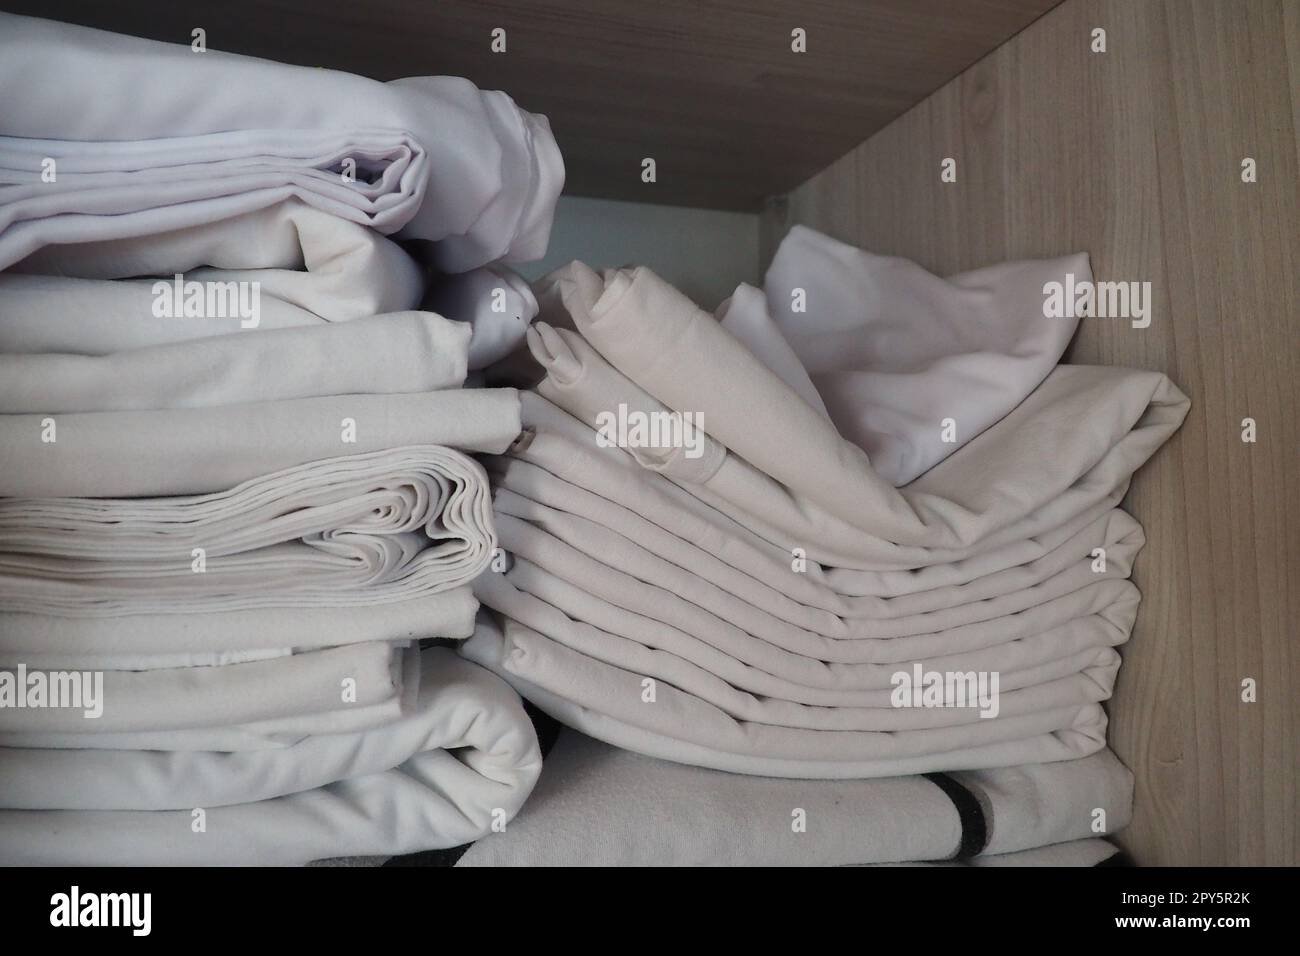 The white linens are stacked in the closet. Internal contents of a linen closet. Household organization. Hygienic conditions for sleep. Fabrics and bed sheets in half open white closet or wardrobe Stock Photo